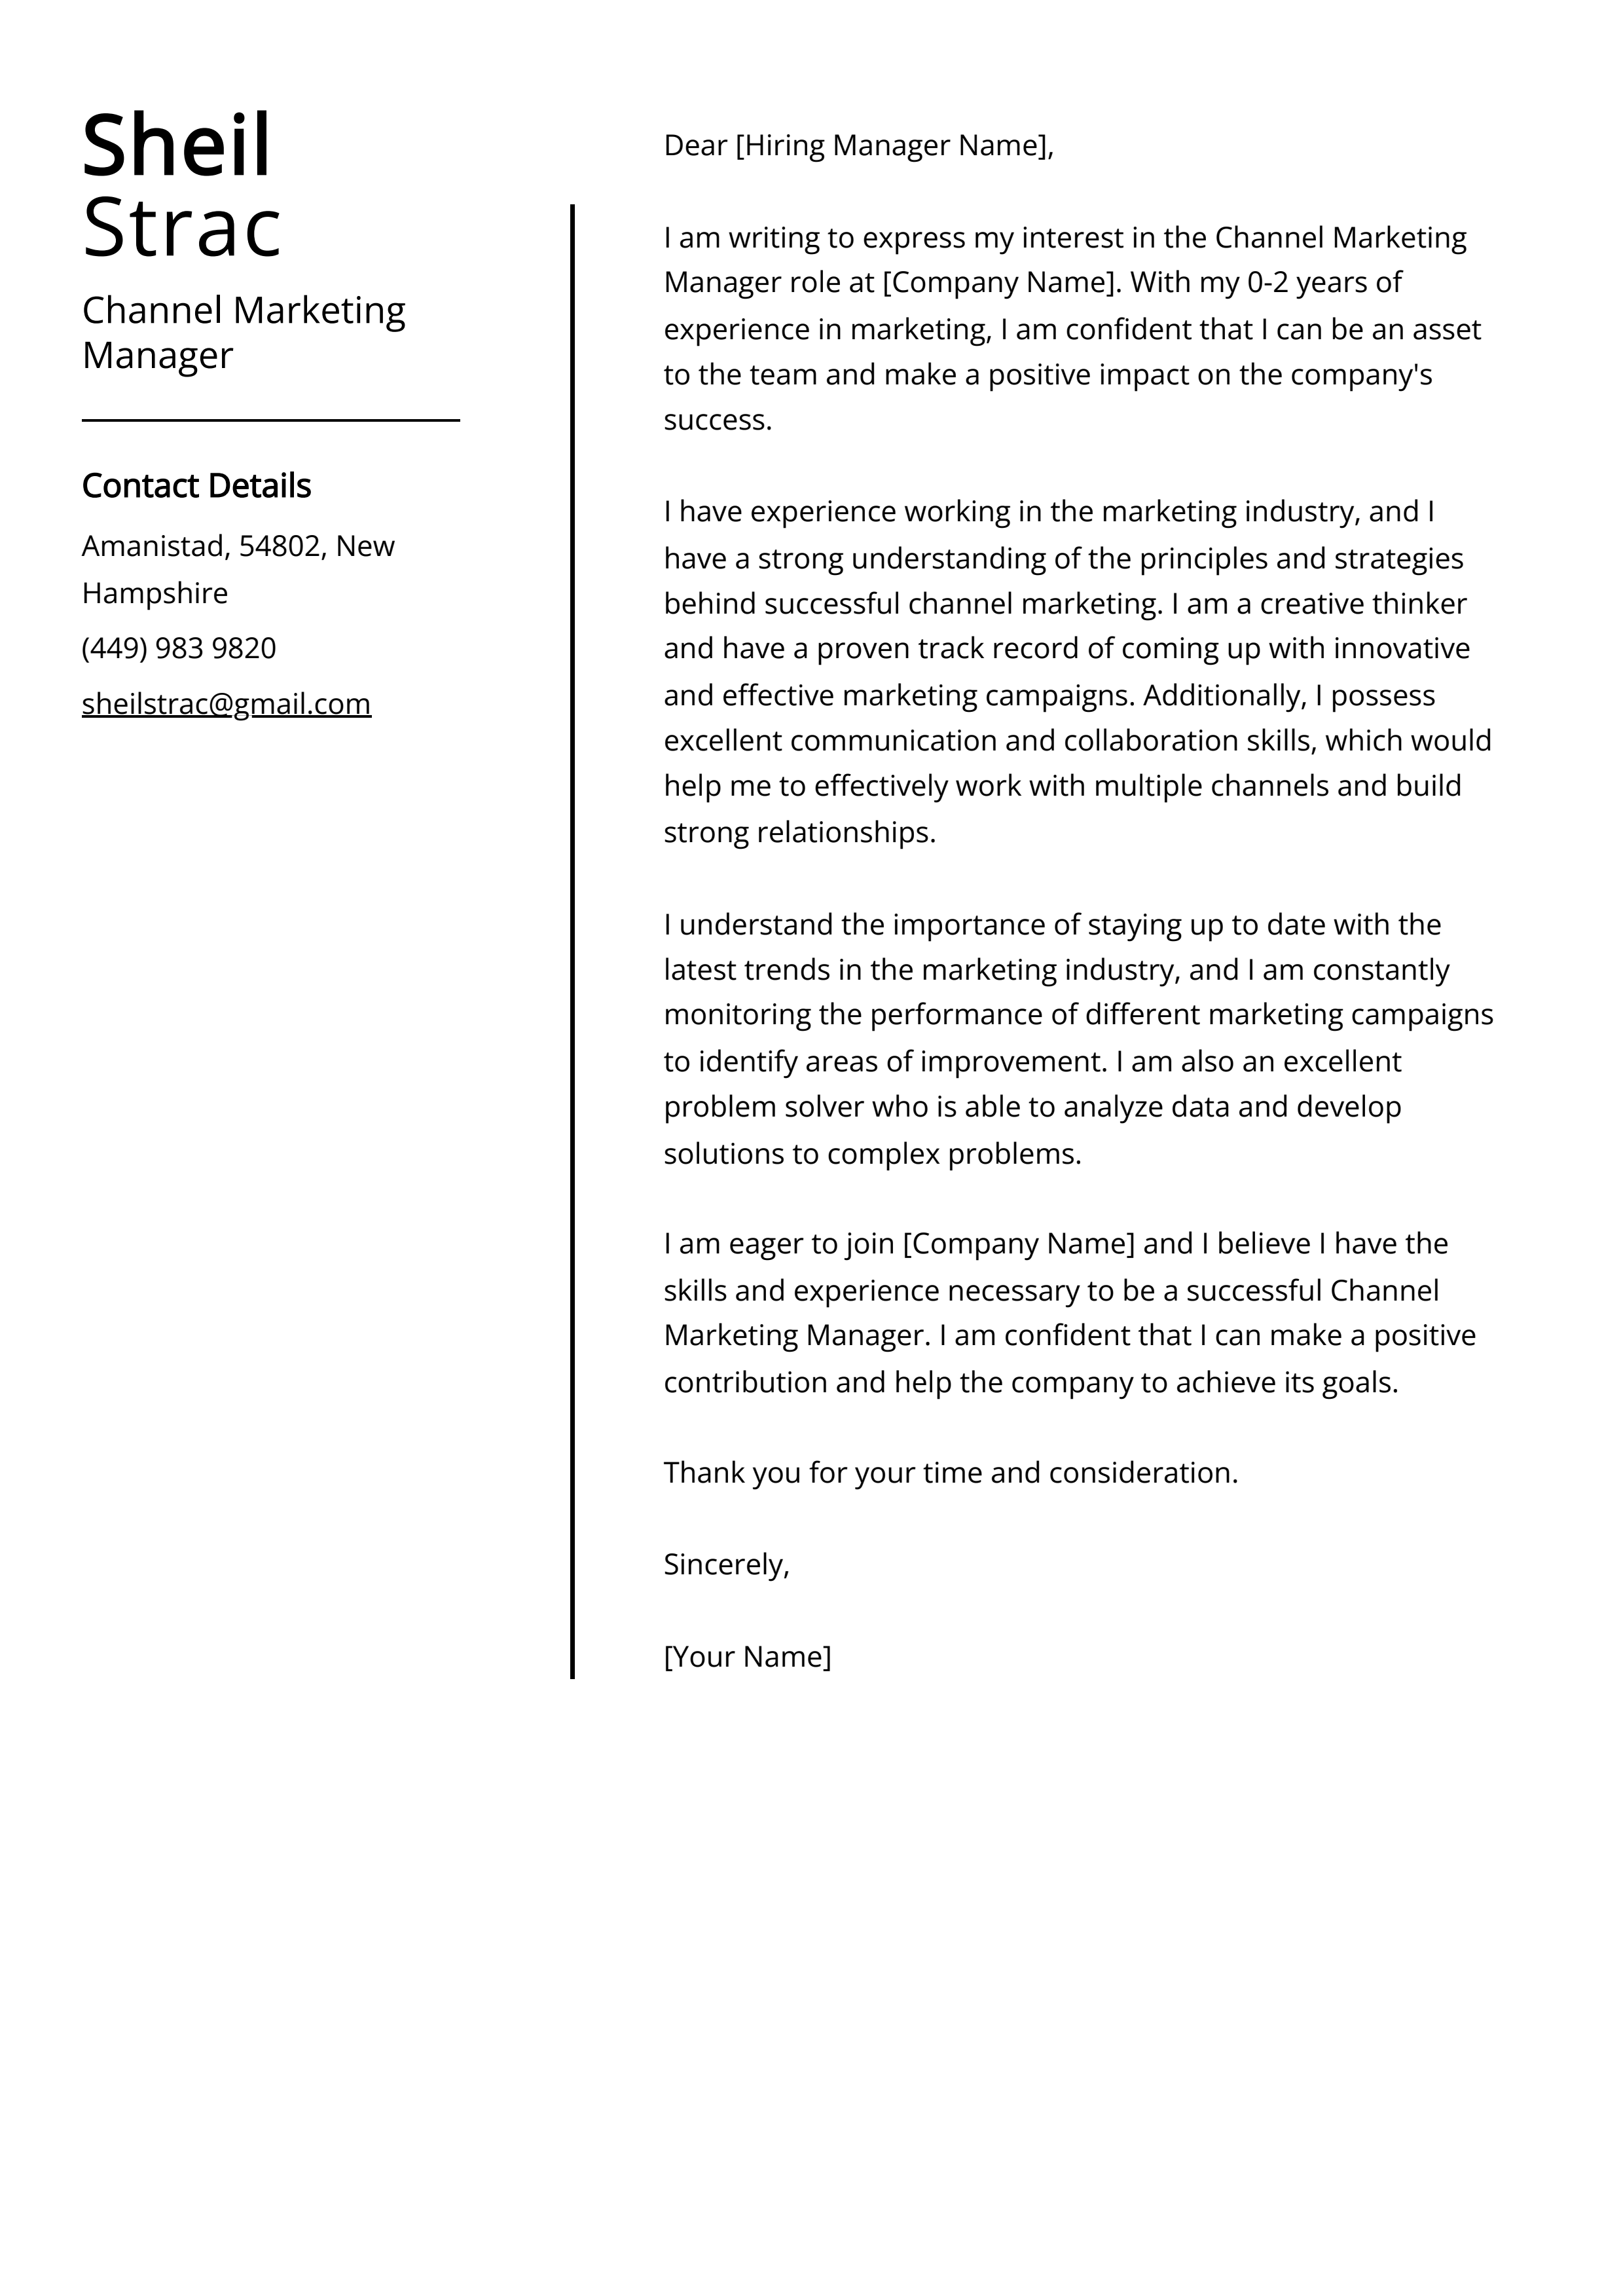 Channel Marketing Manager Cover Letter Example